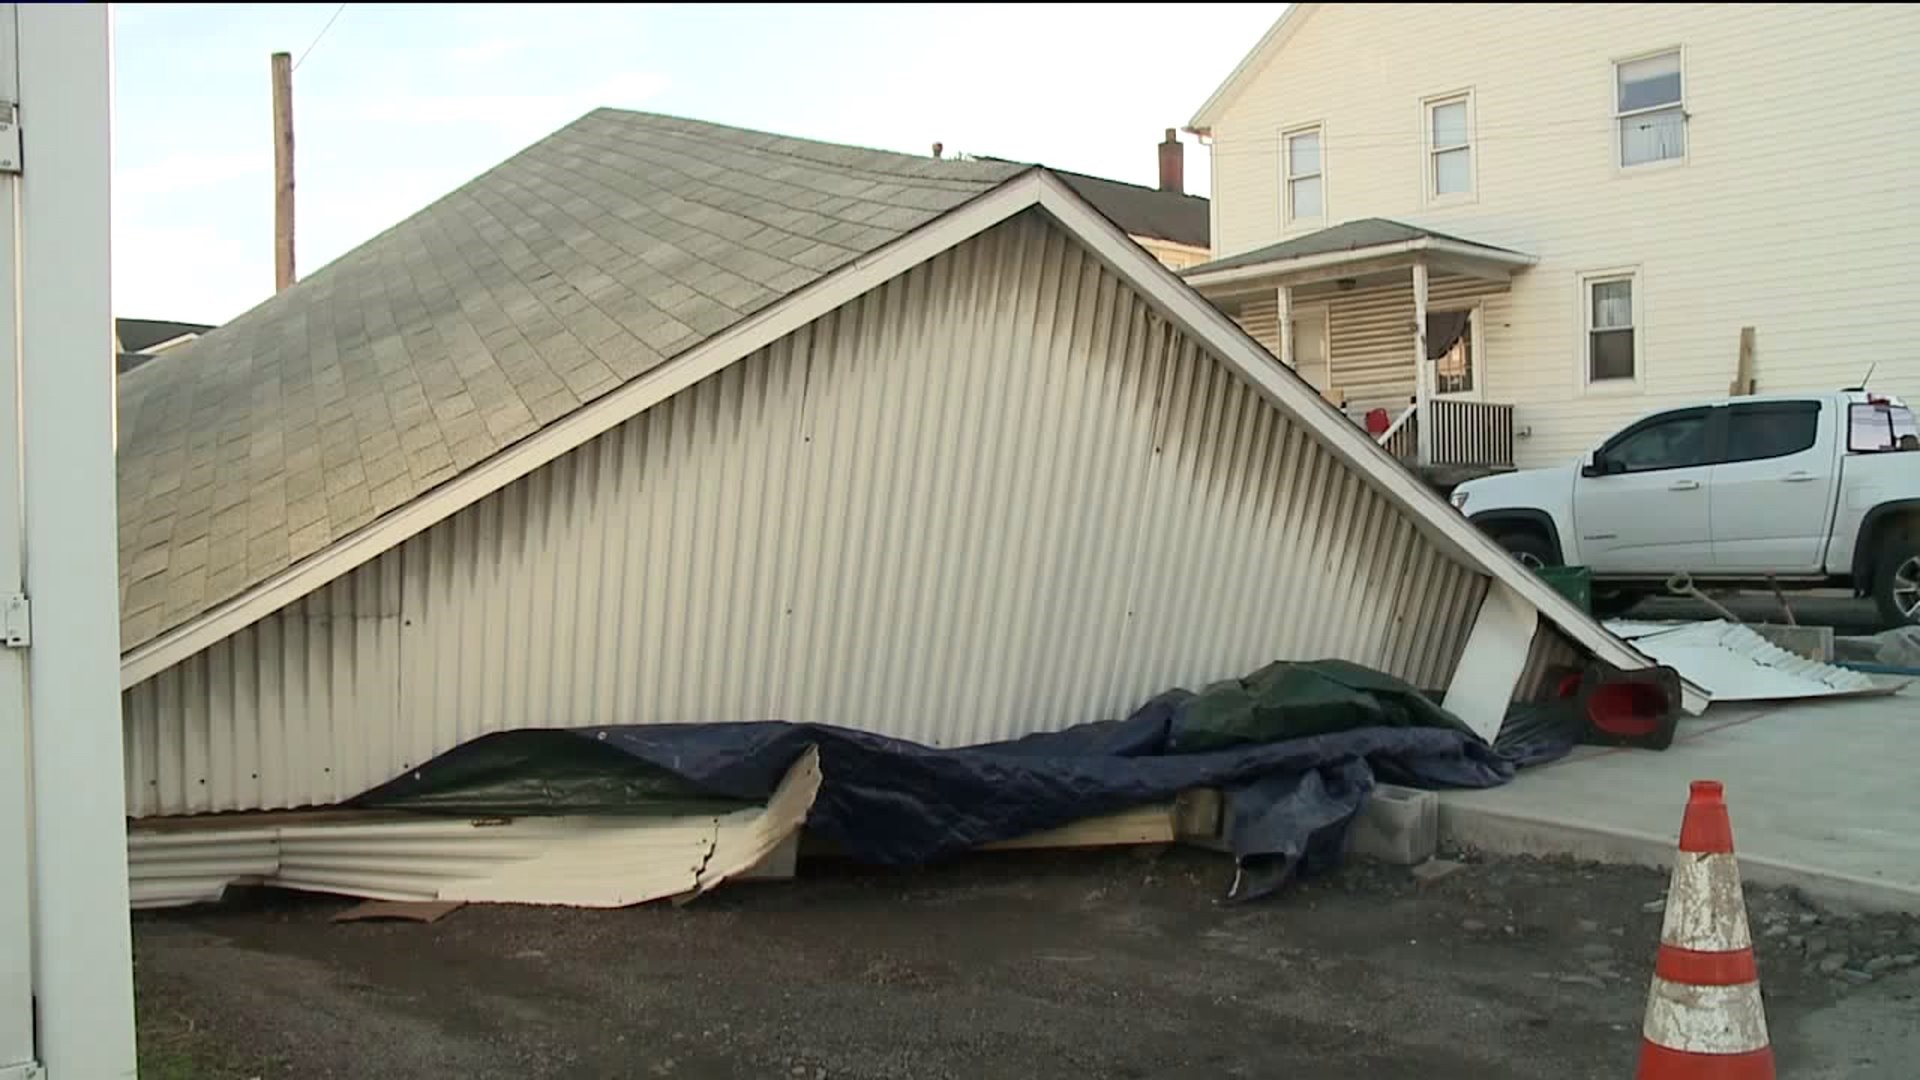 Strong Winds Blamed for Garage Collapse in Dupont